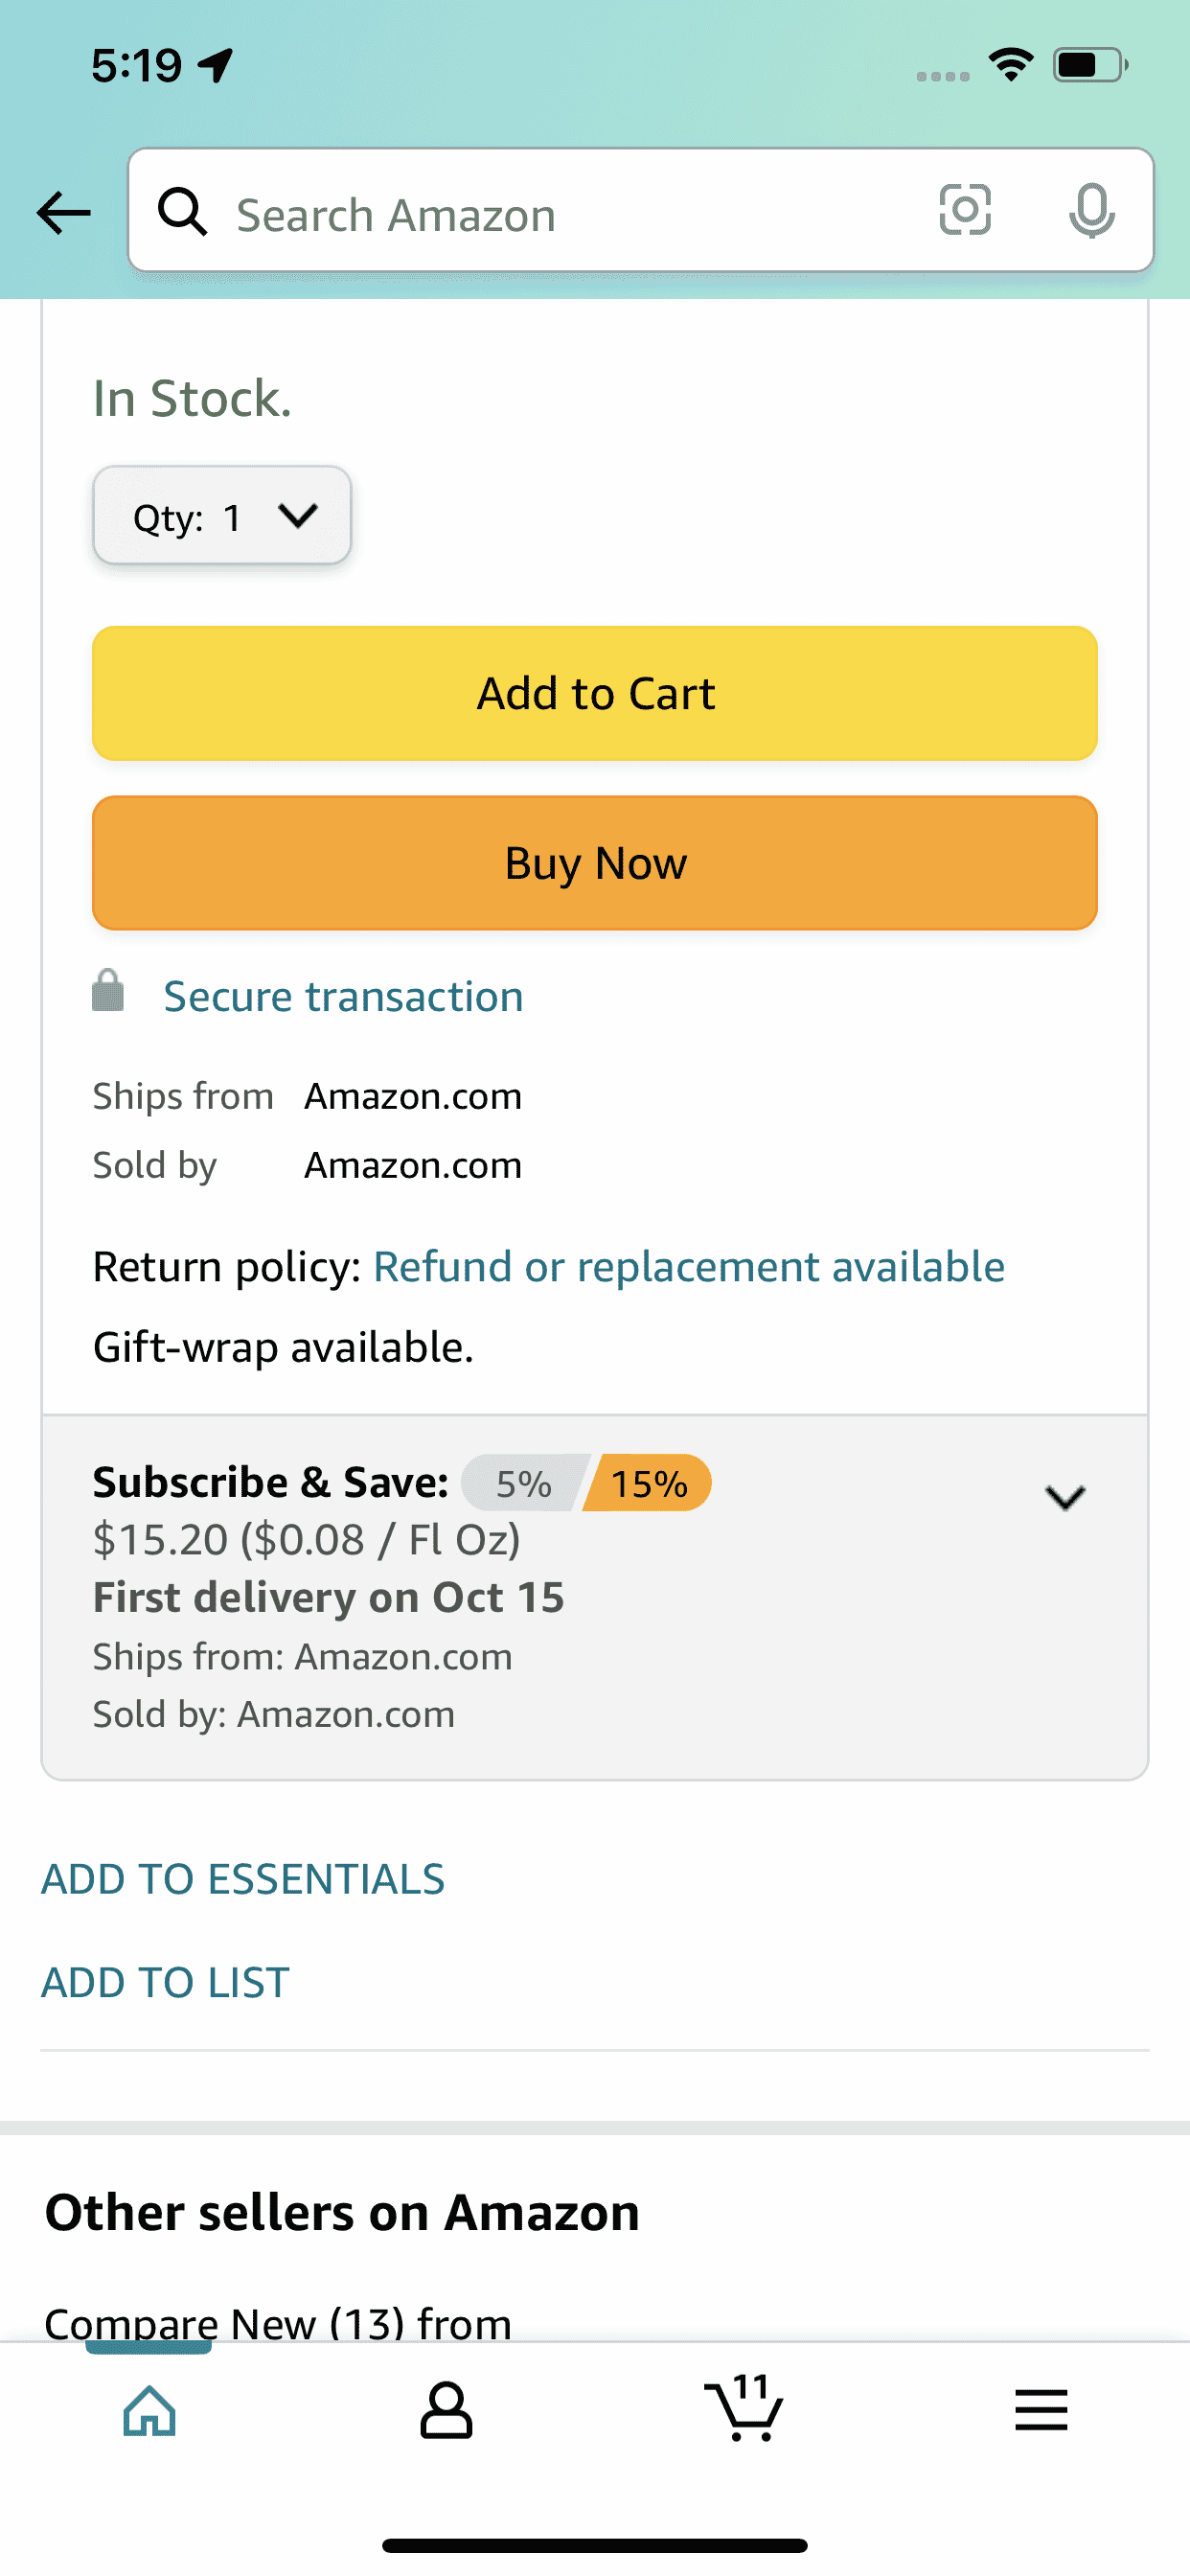 How can we get additional discount on Amazon?